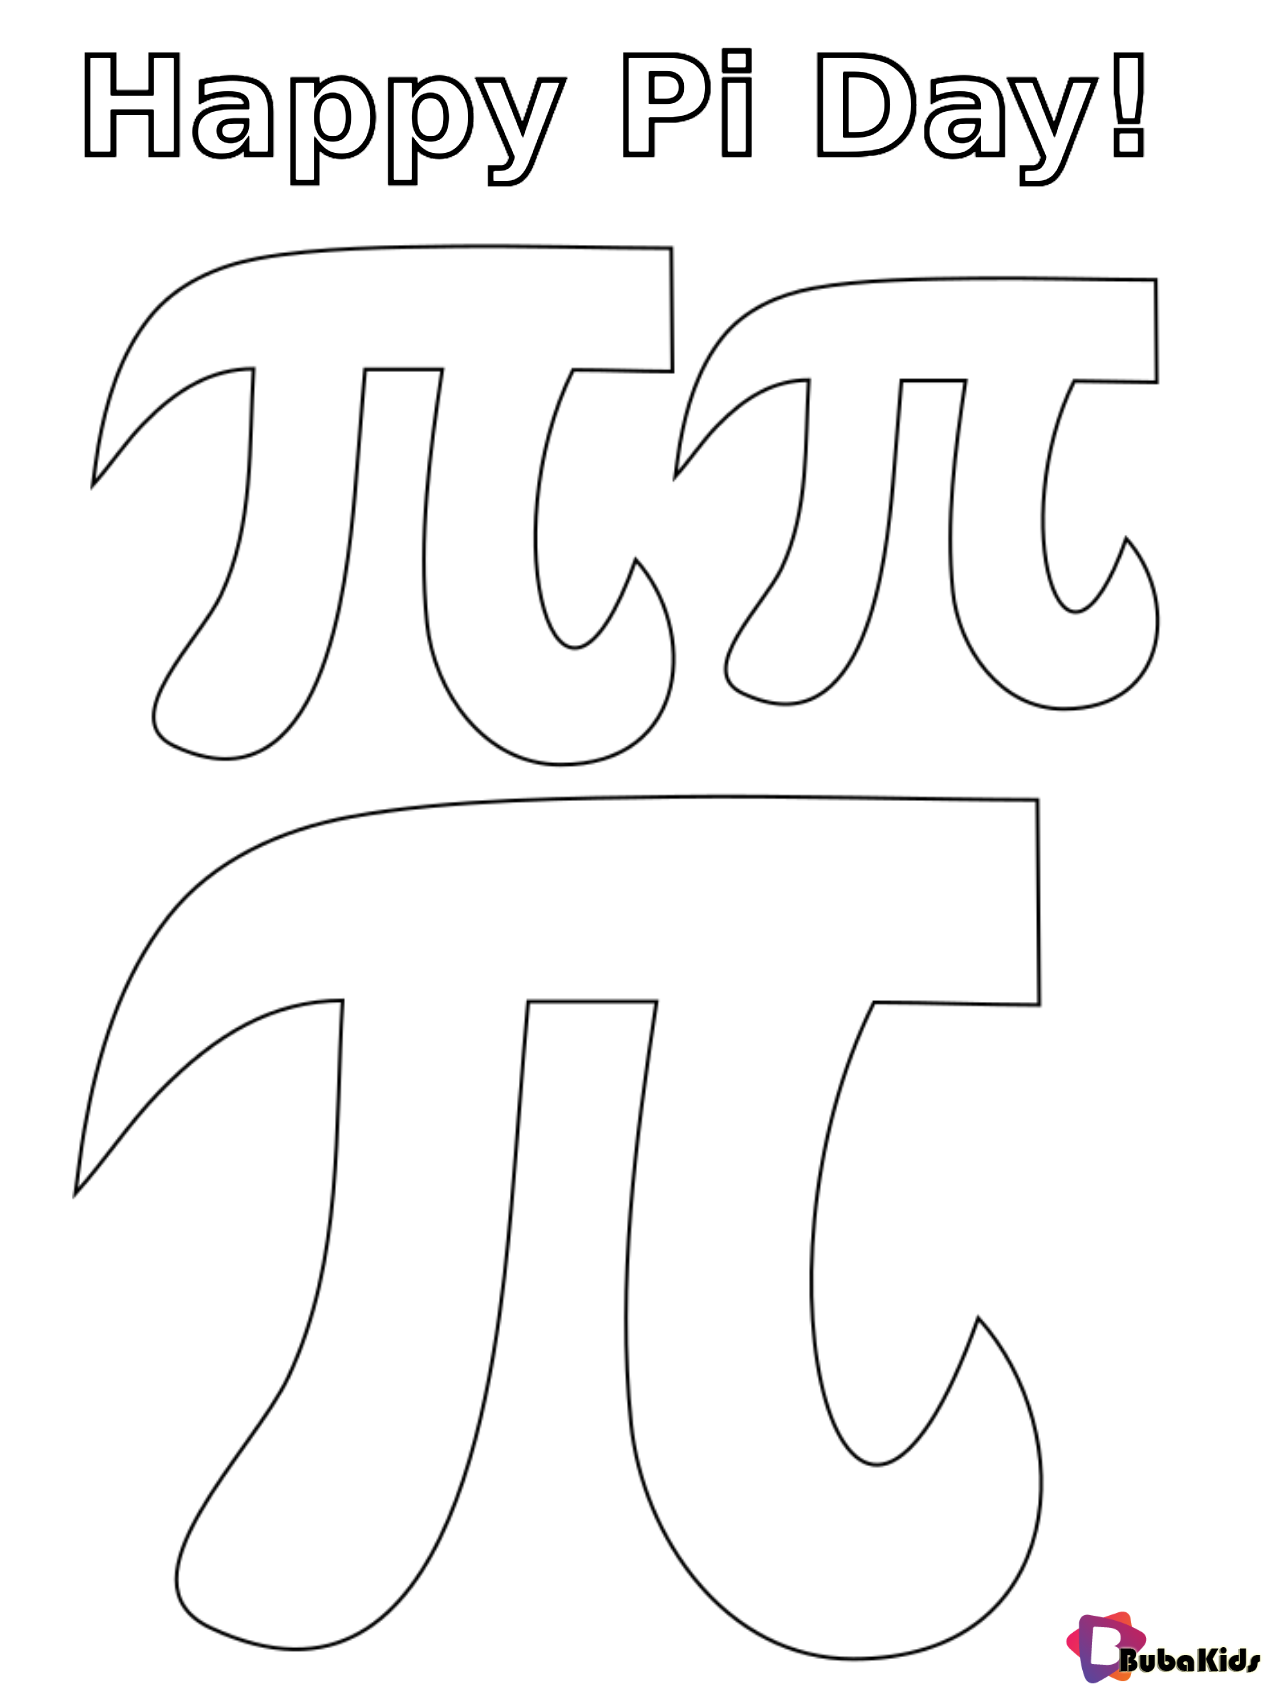 Happy Pi Day march 14 coloring page Wallpaper